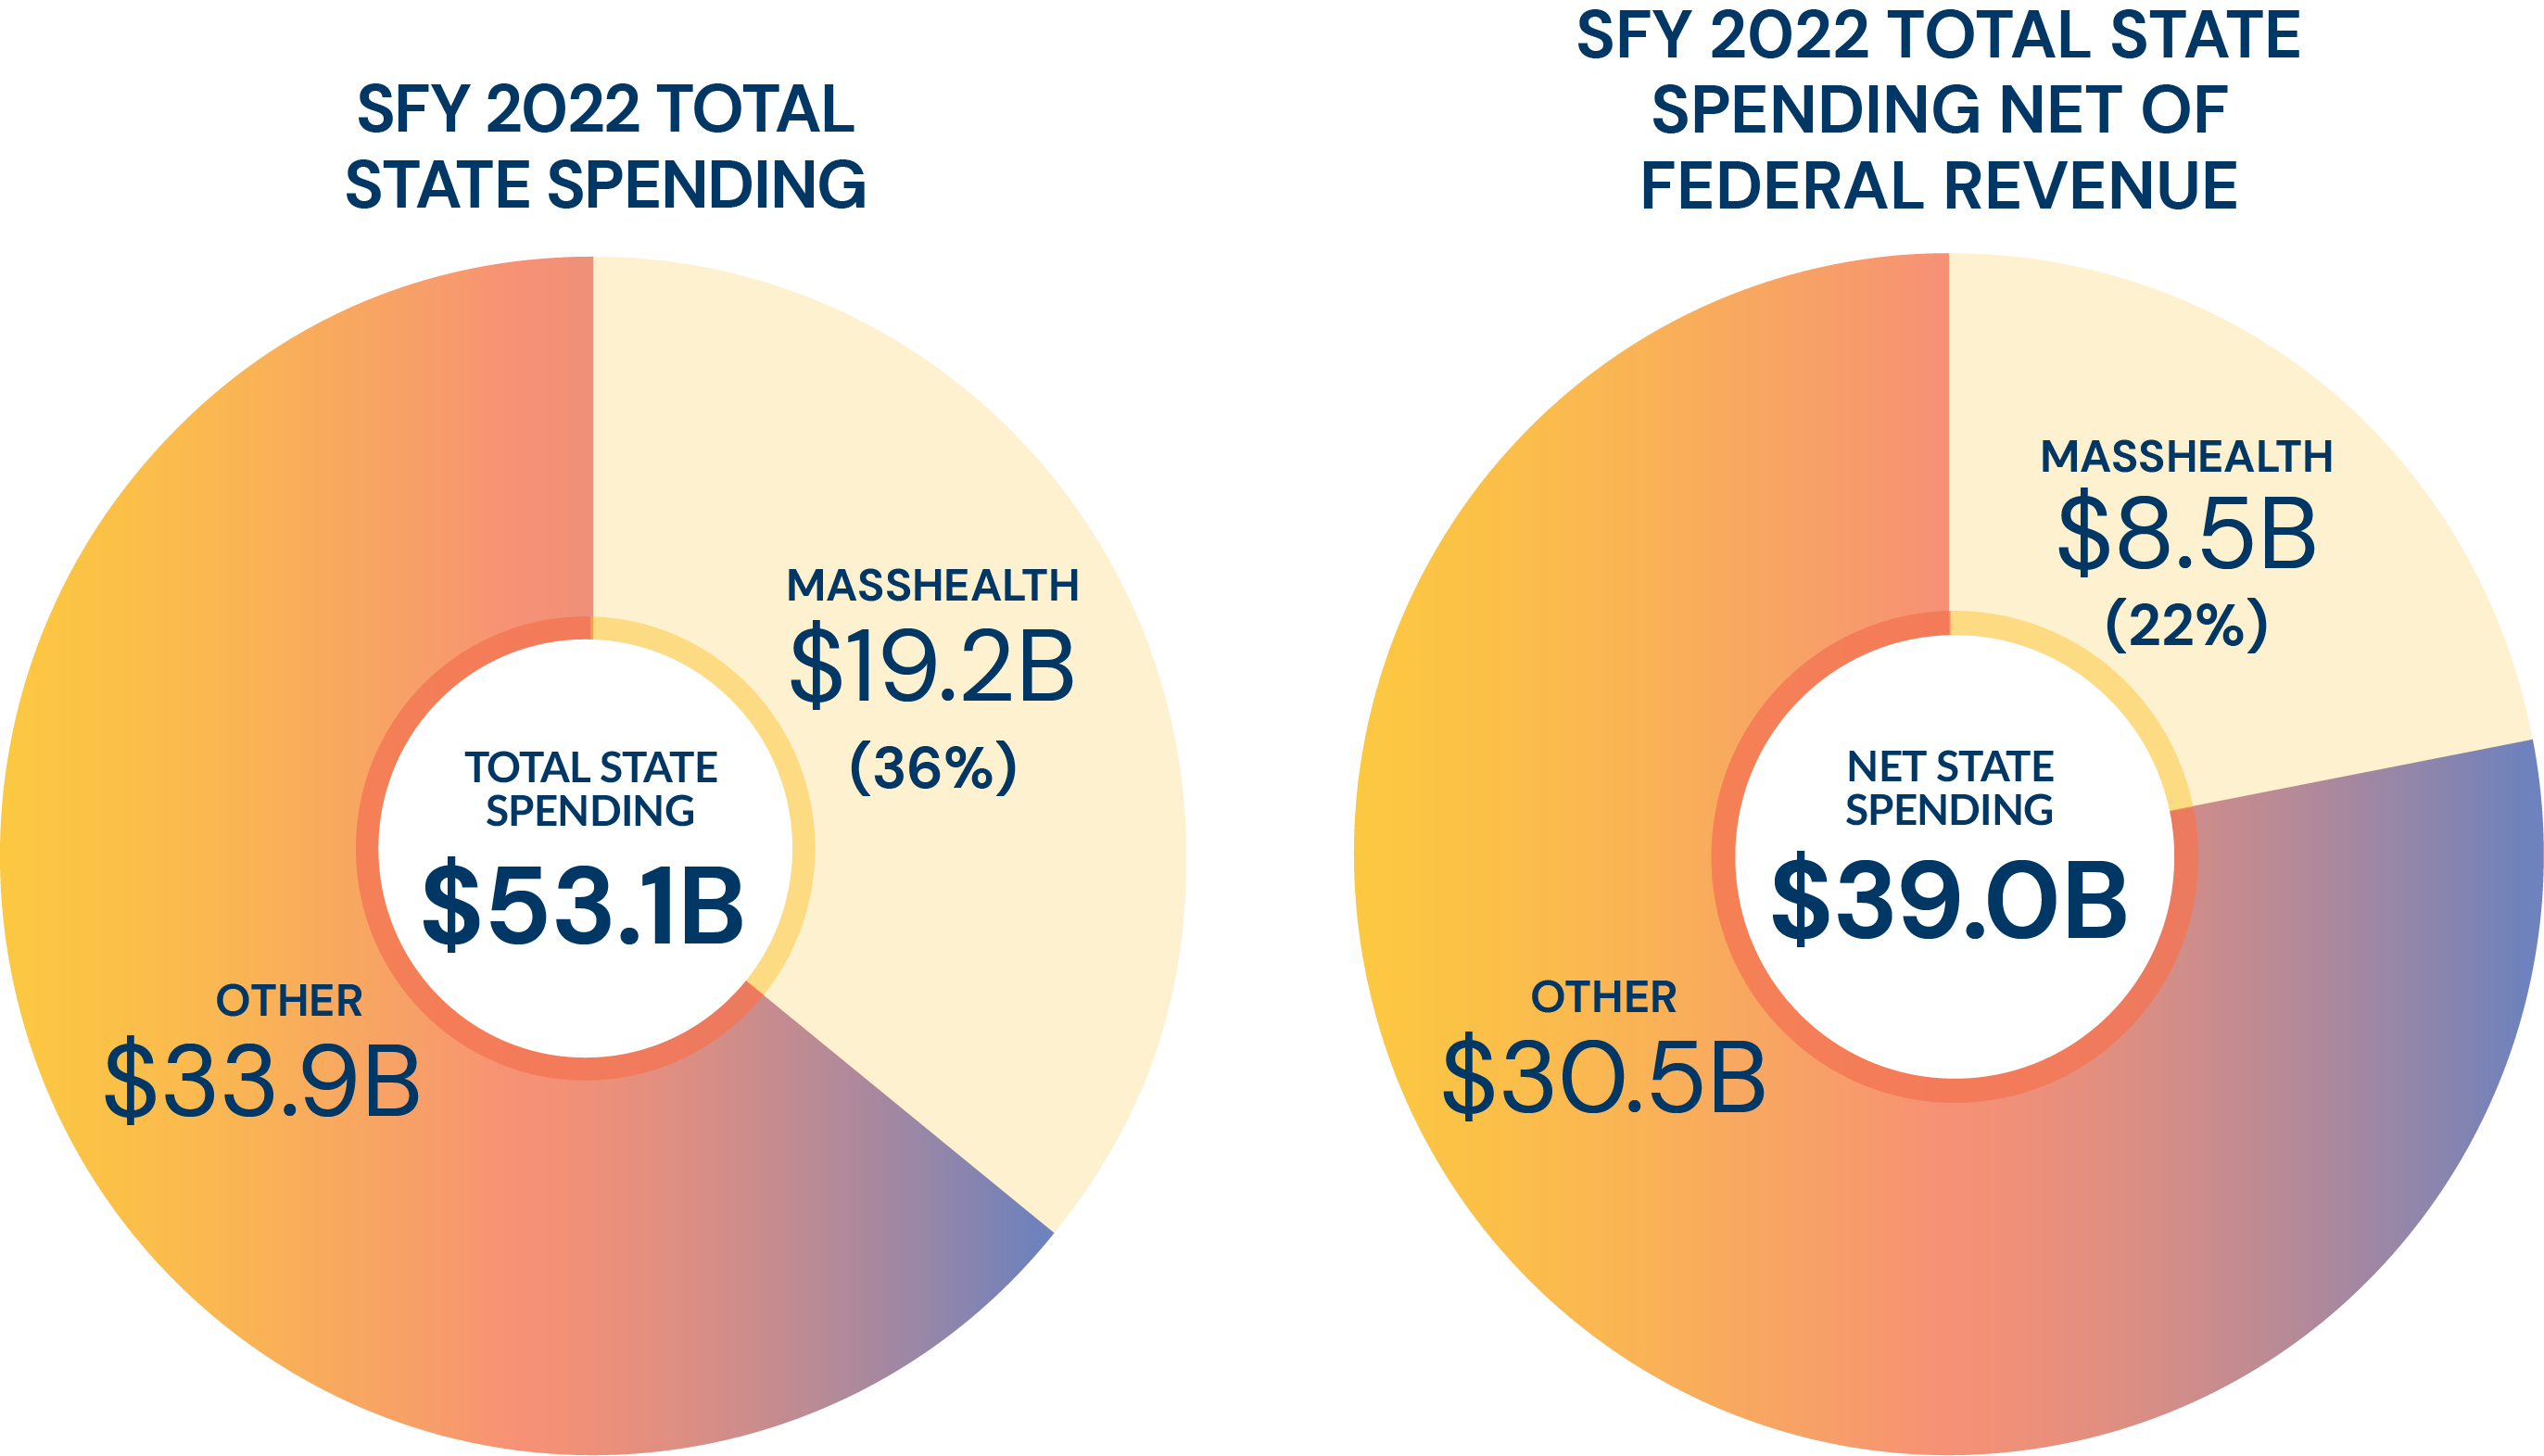 Pie chart infographics: SFY 2022 total state spending (MassHealth $19.2B, $33.9B other, $53.1B total state spending); SFY 2022 total state spending net of federal revenue (MassHealth $8.5B, $30.5B other, $39.0B net state spending)